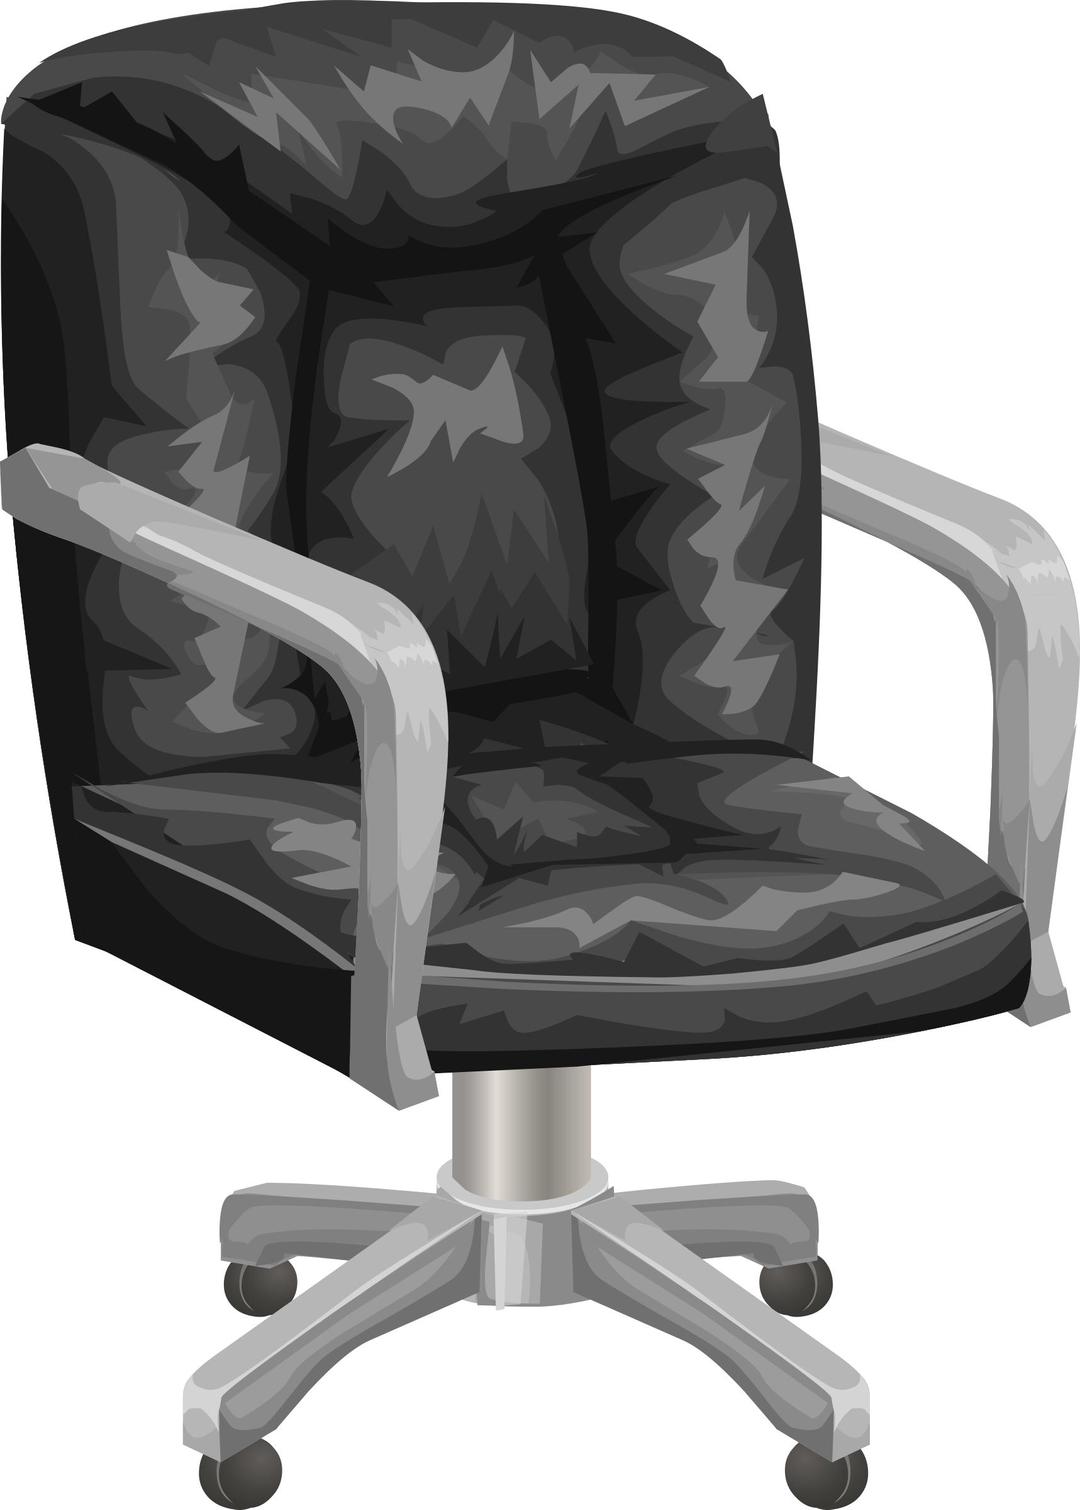 Black office chair from Glitch png transparent